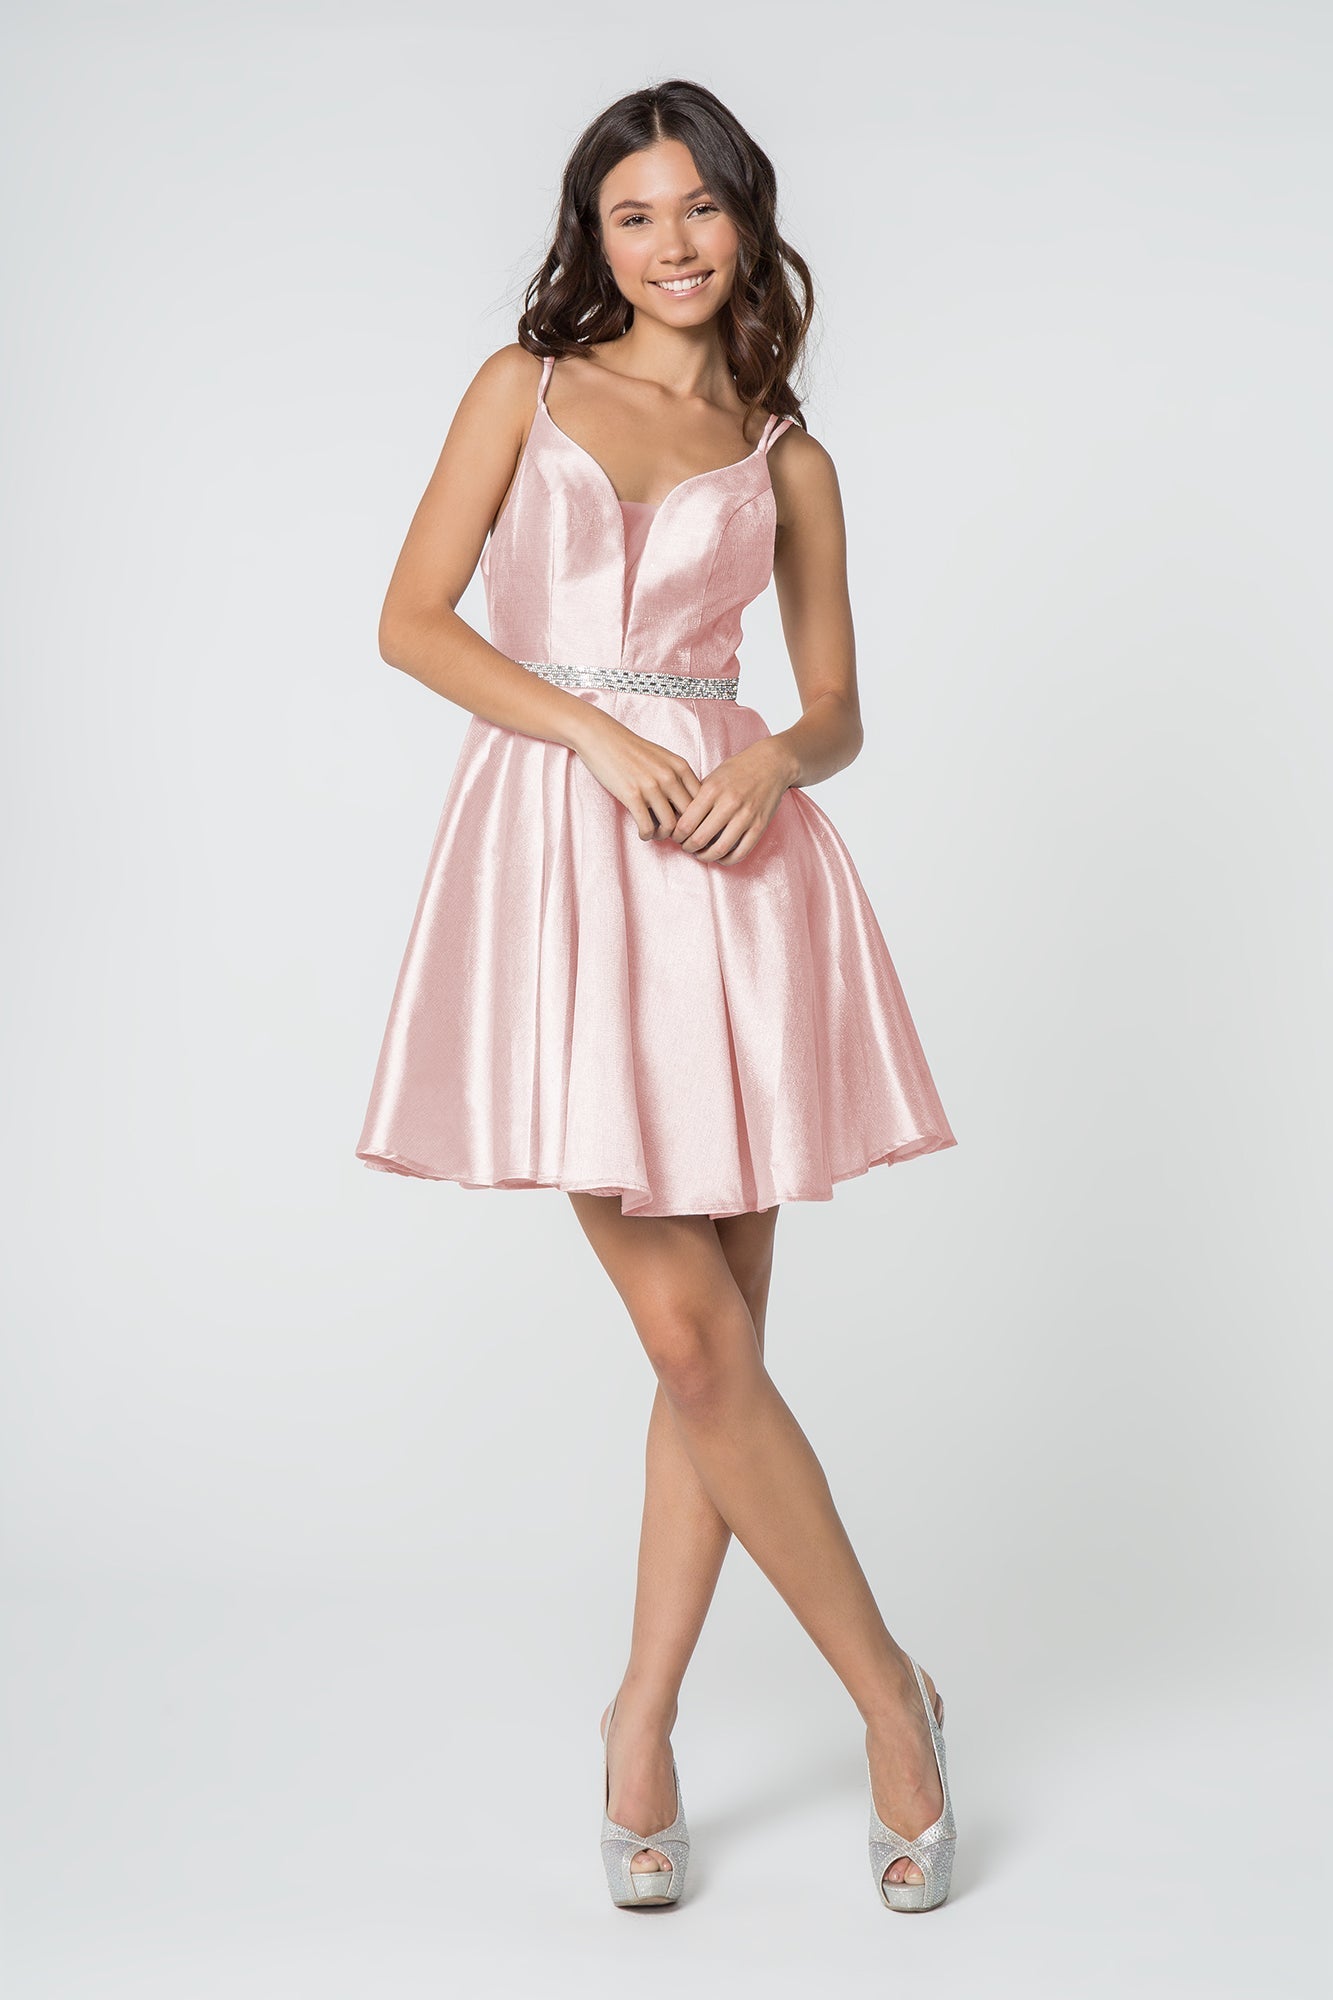 Illusion Deep V-Neck Satin Short Dress Beads Accented Waist Band GLGS2843 Elsy Style HOMECOMING